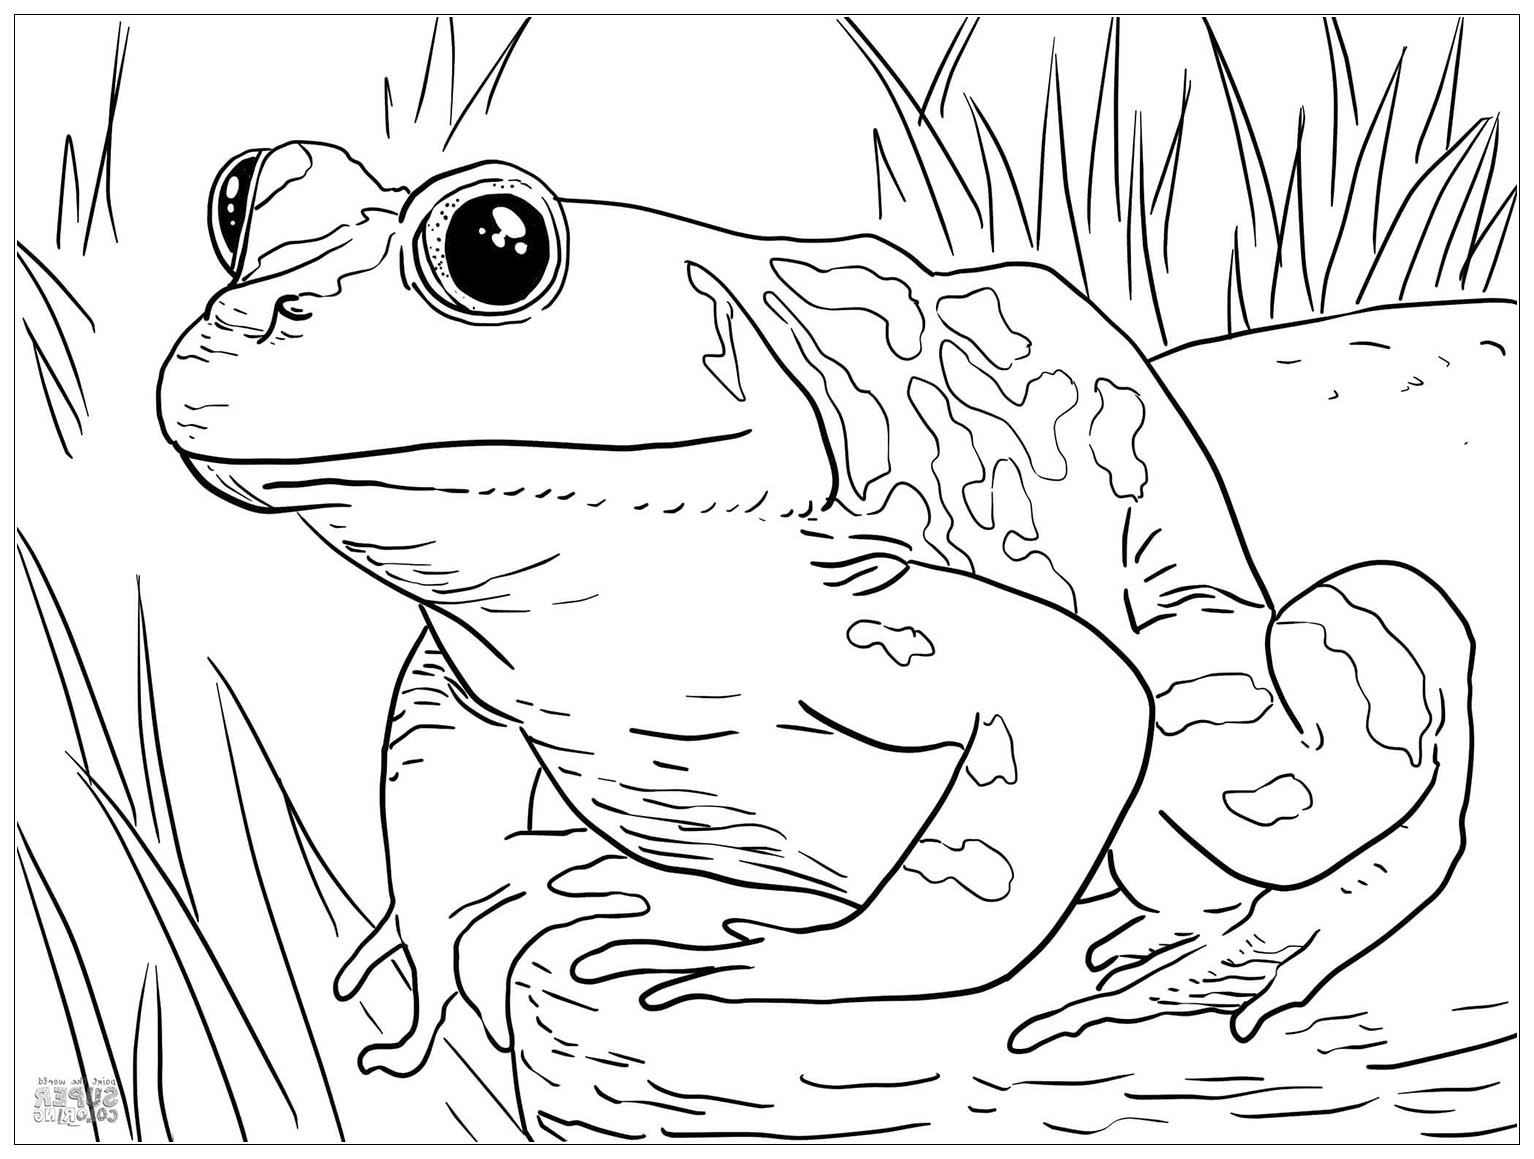 Frog image to download and color Frogs Kids Coloring Pages